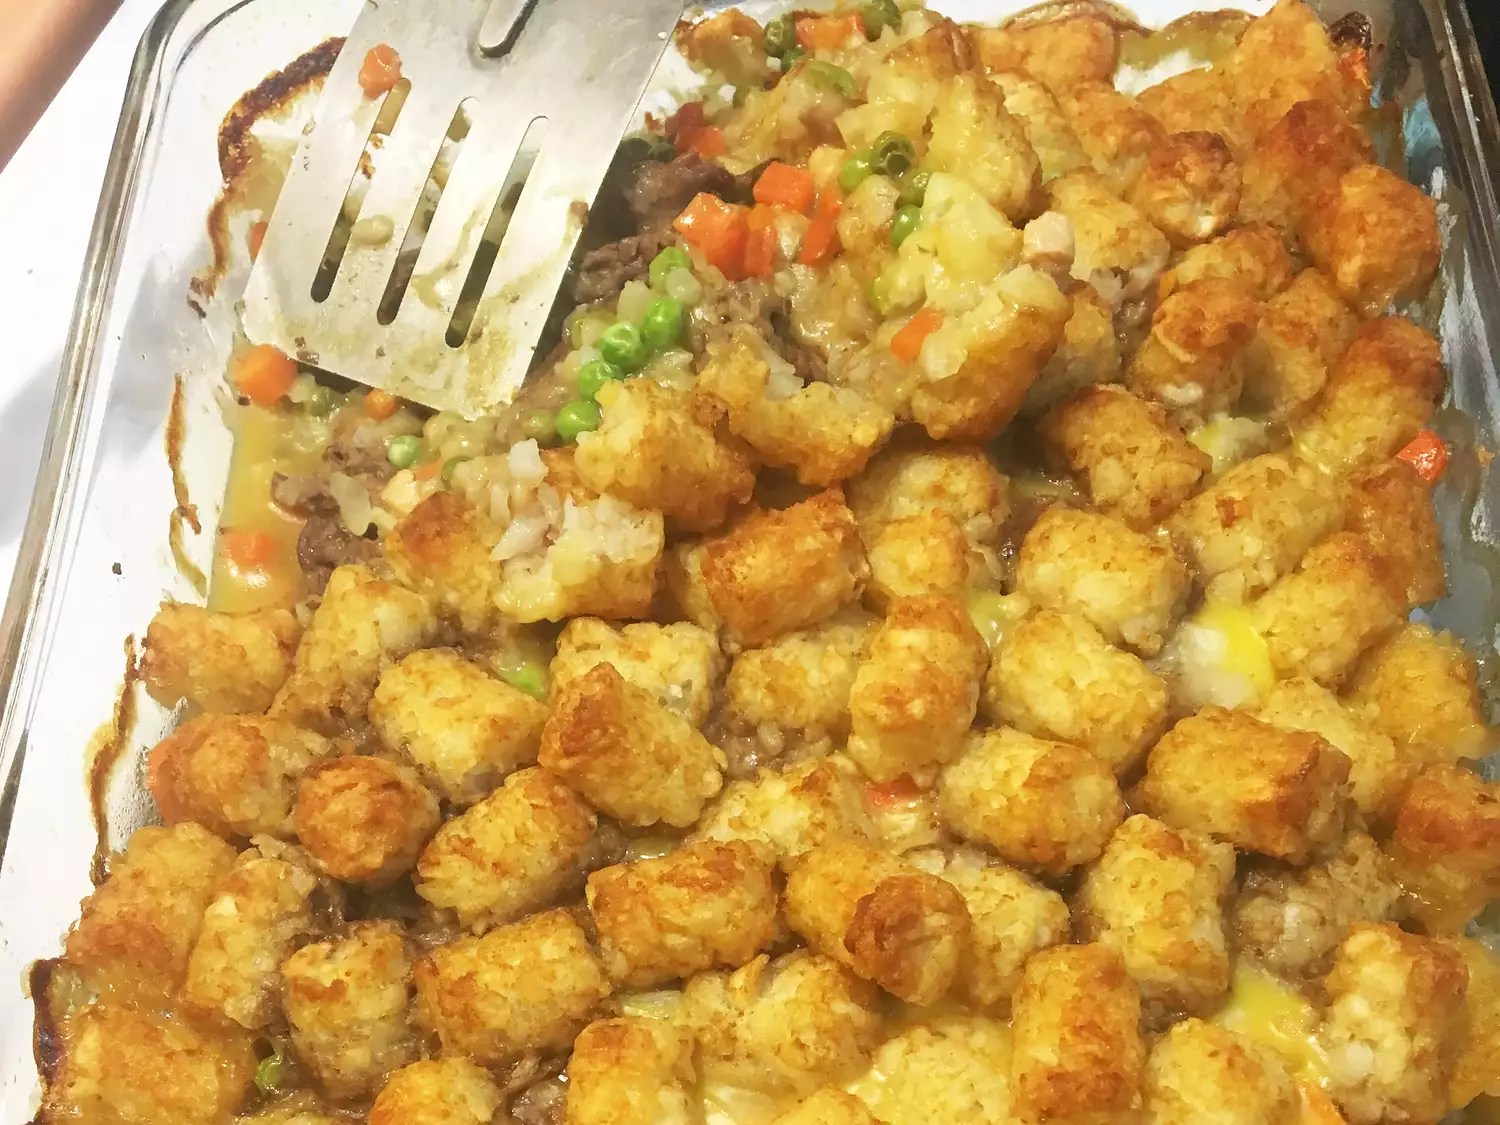 Irresistible Tater Tot Delight!